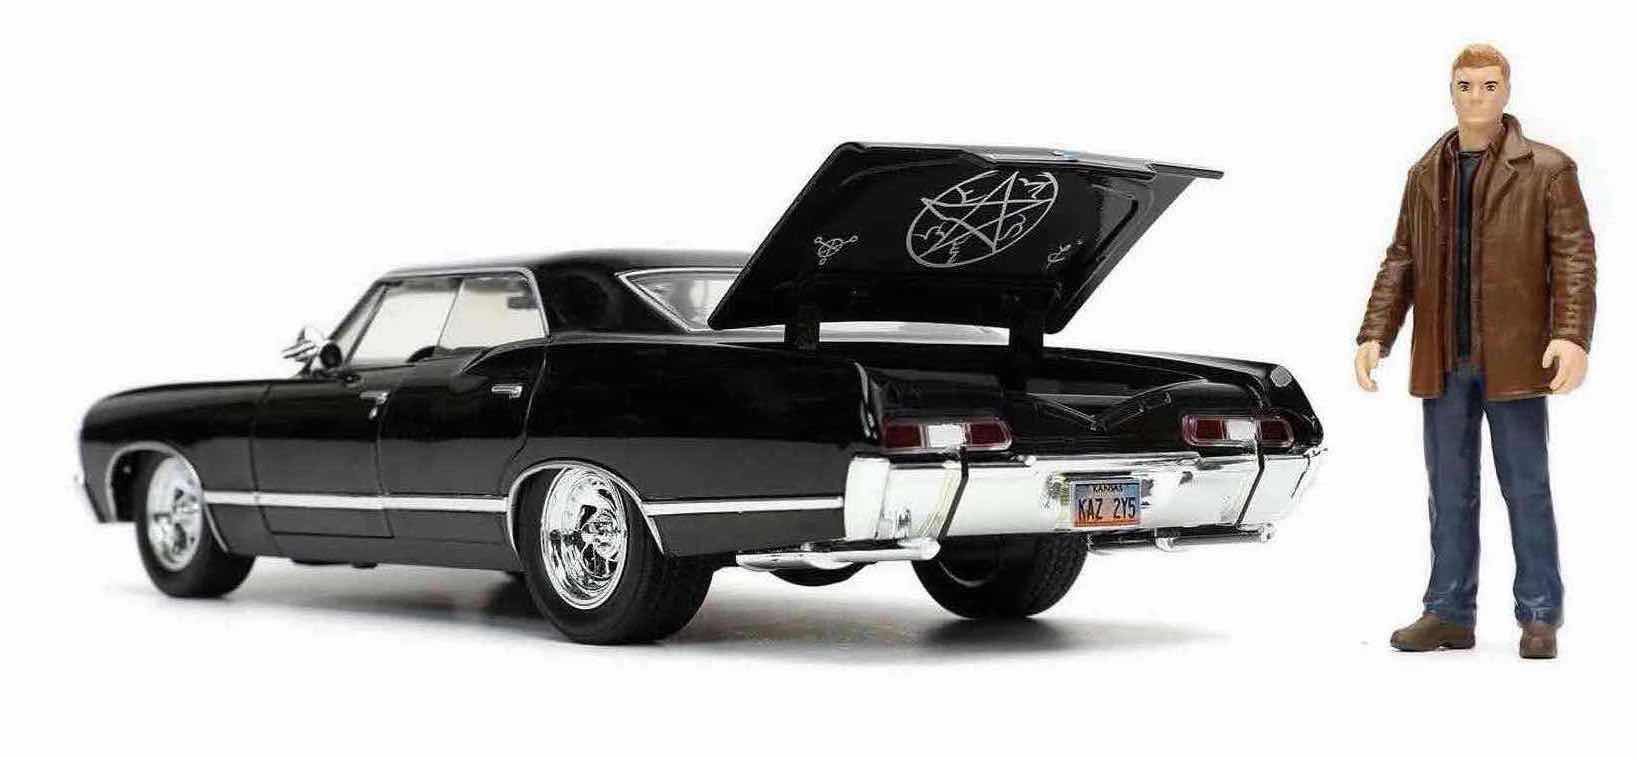 Photo 1 of NEW JADA TOYS HOLLYWOOD RIDES SUPERNATURAL JOIN THE HUNT  “DEAN WINCHESTER & 1967 CHEVROLET IMPALA SS SPORT SEDAN” (GM OFFICIAL LICENSED PRODUCT)